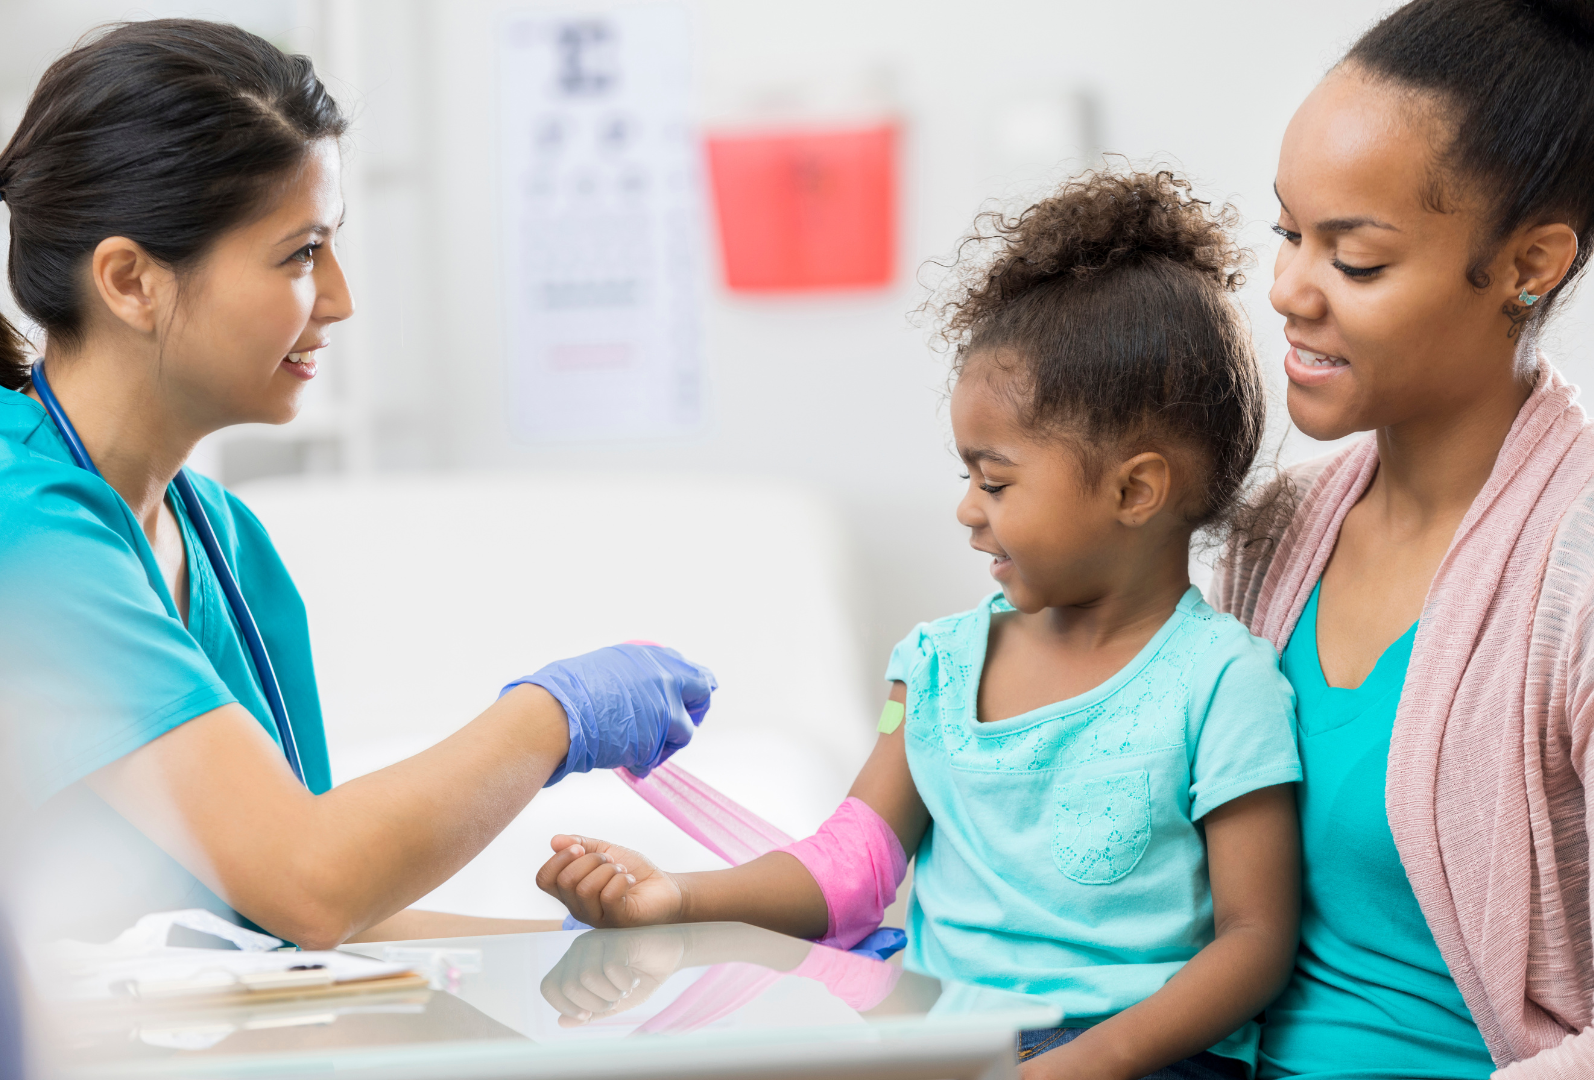 Nurse practitioner bandaging child's arm in clinic with mom present